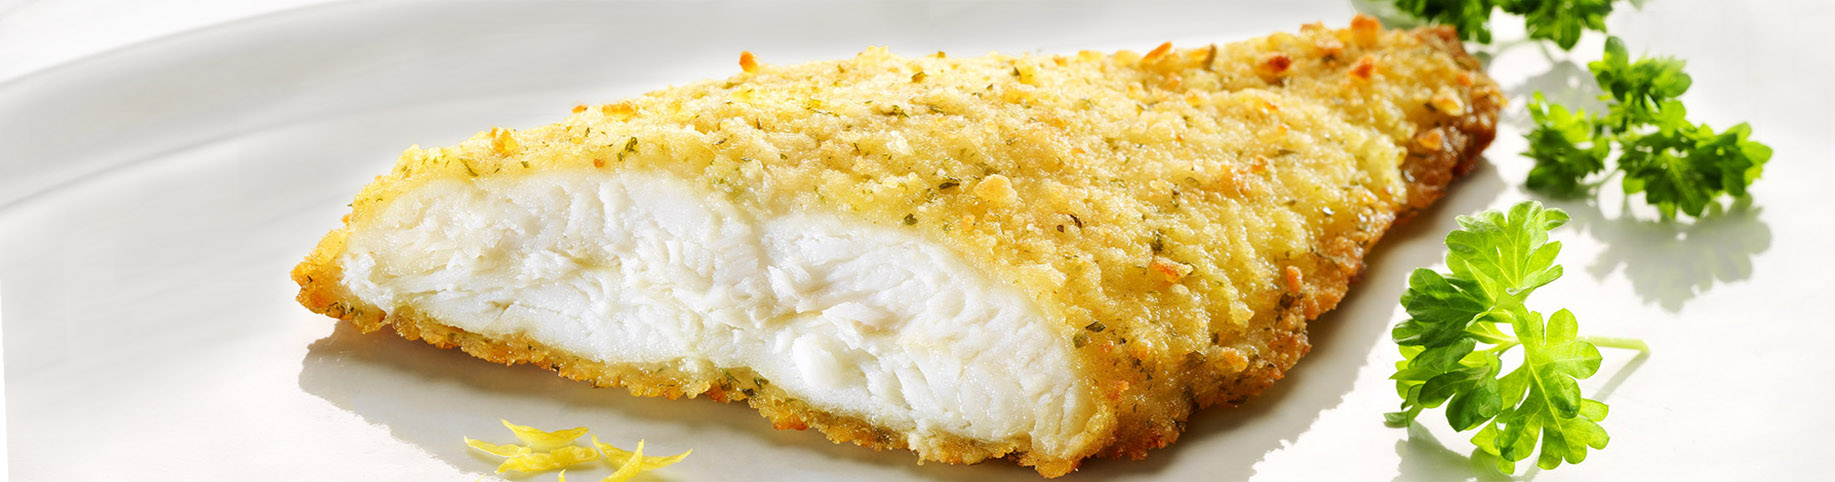 Close up of a delicious and nutritious breaded fish fillet.